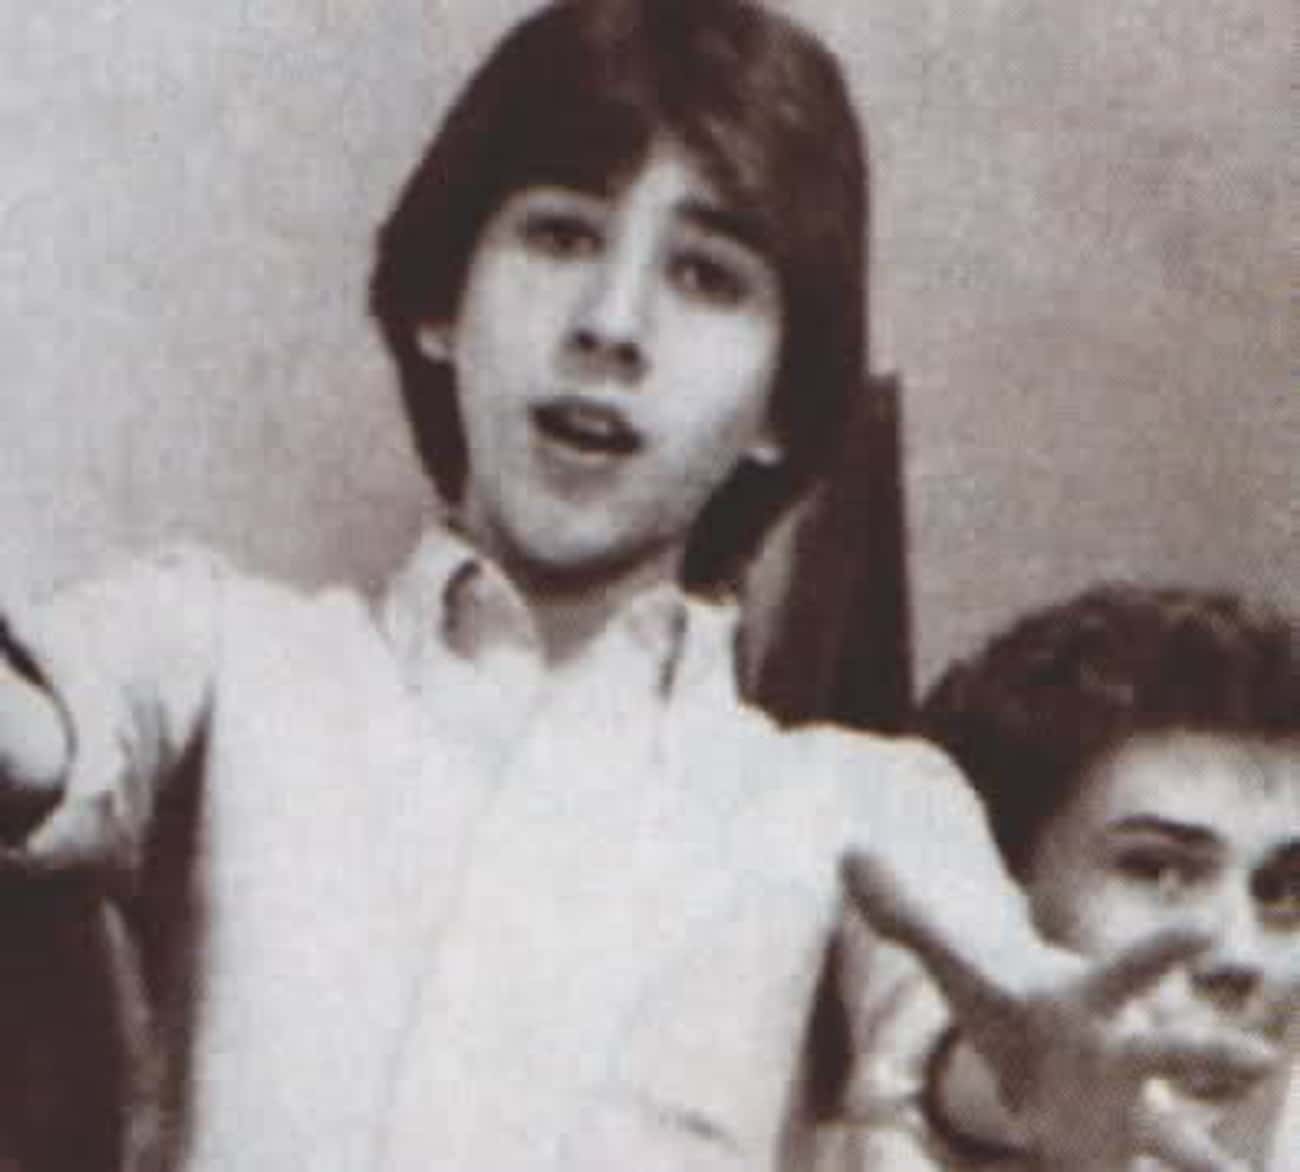 Young Marilyn Manson in White Buttondown